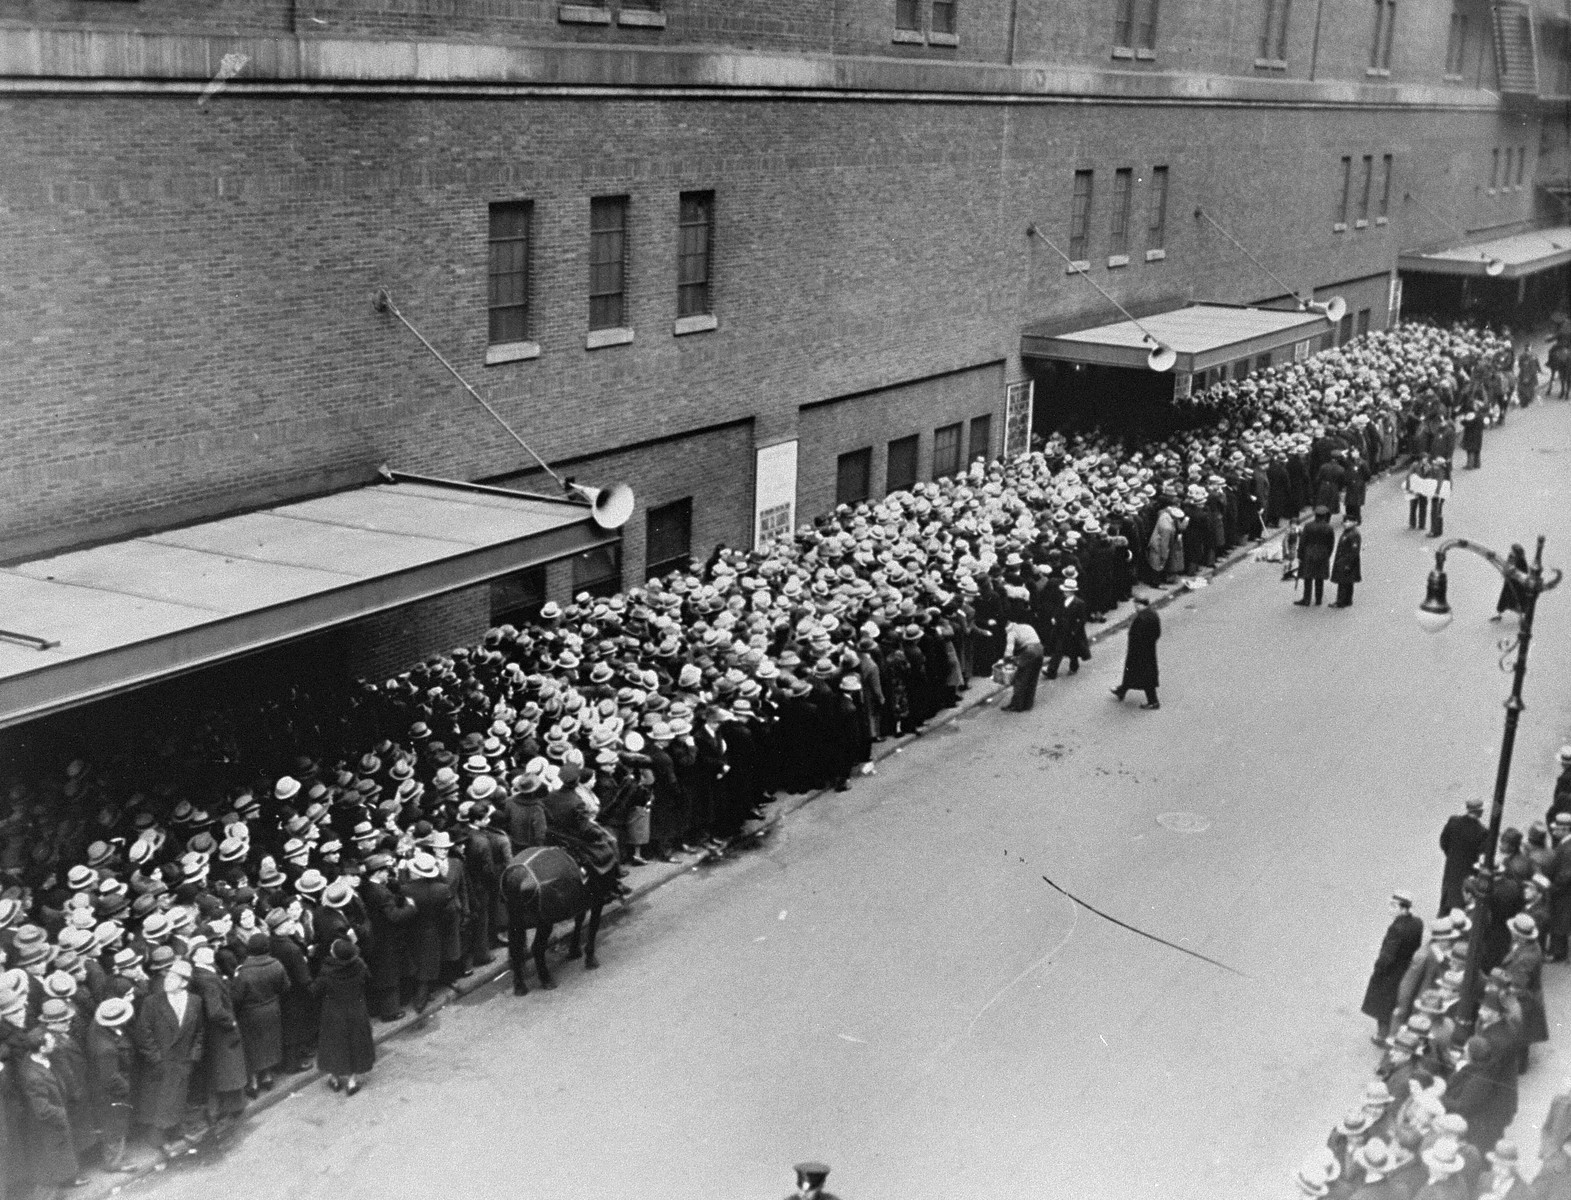 View of people queued up at the entrance to Madison Square Garden, where a mass demonstration is scheduled for later in the day to protest against the Nazi persecution of German Jews.  More than 20,000 people are expected to attend the event which will feature addresses by prominent Catholic, Protestant and Jewish speakers.